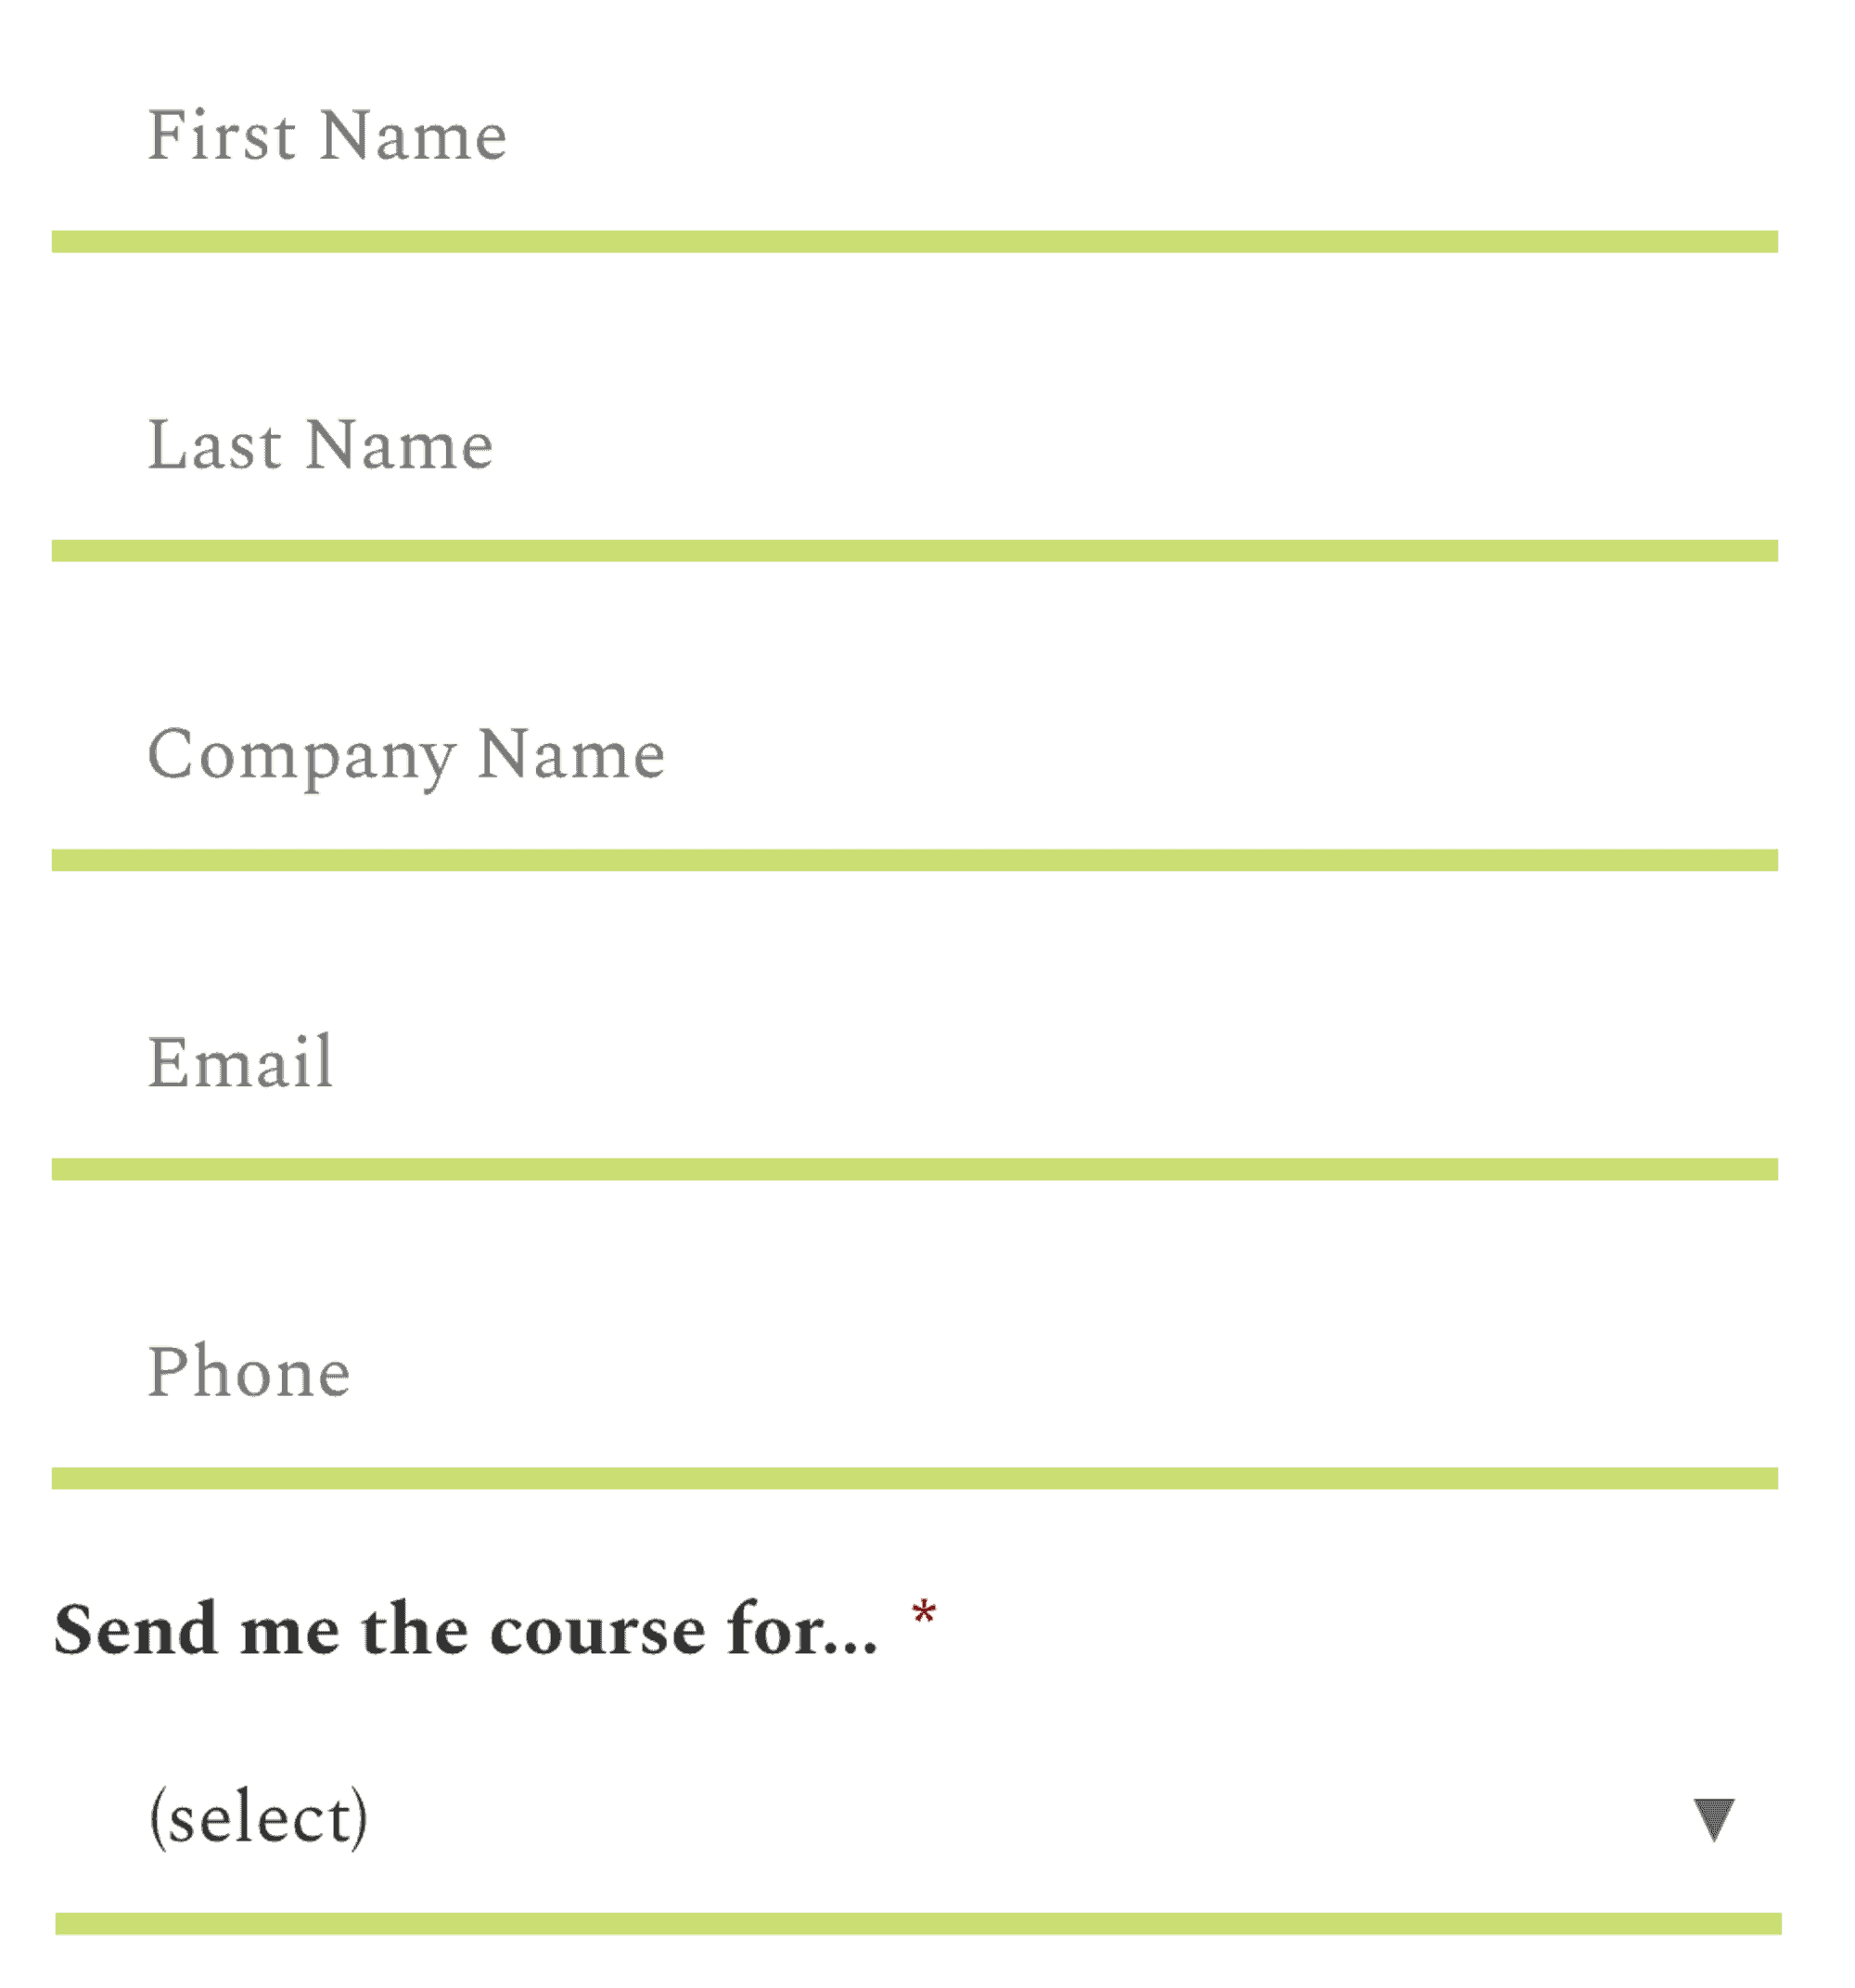 Form with 5 fields that use a placeholder rather than a label: first name, last name, company name, email, phone.